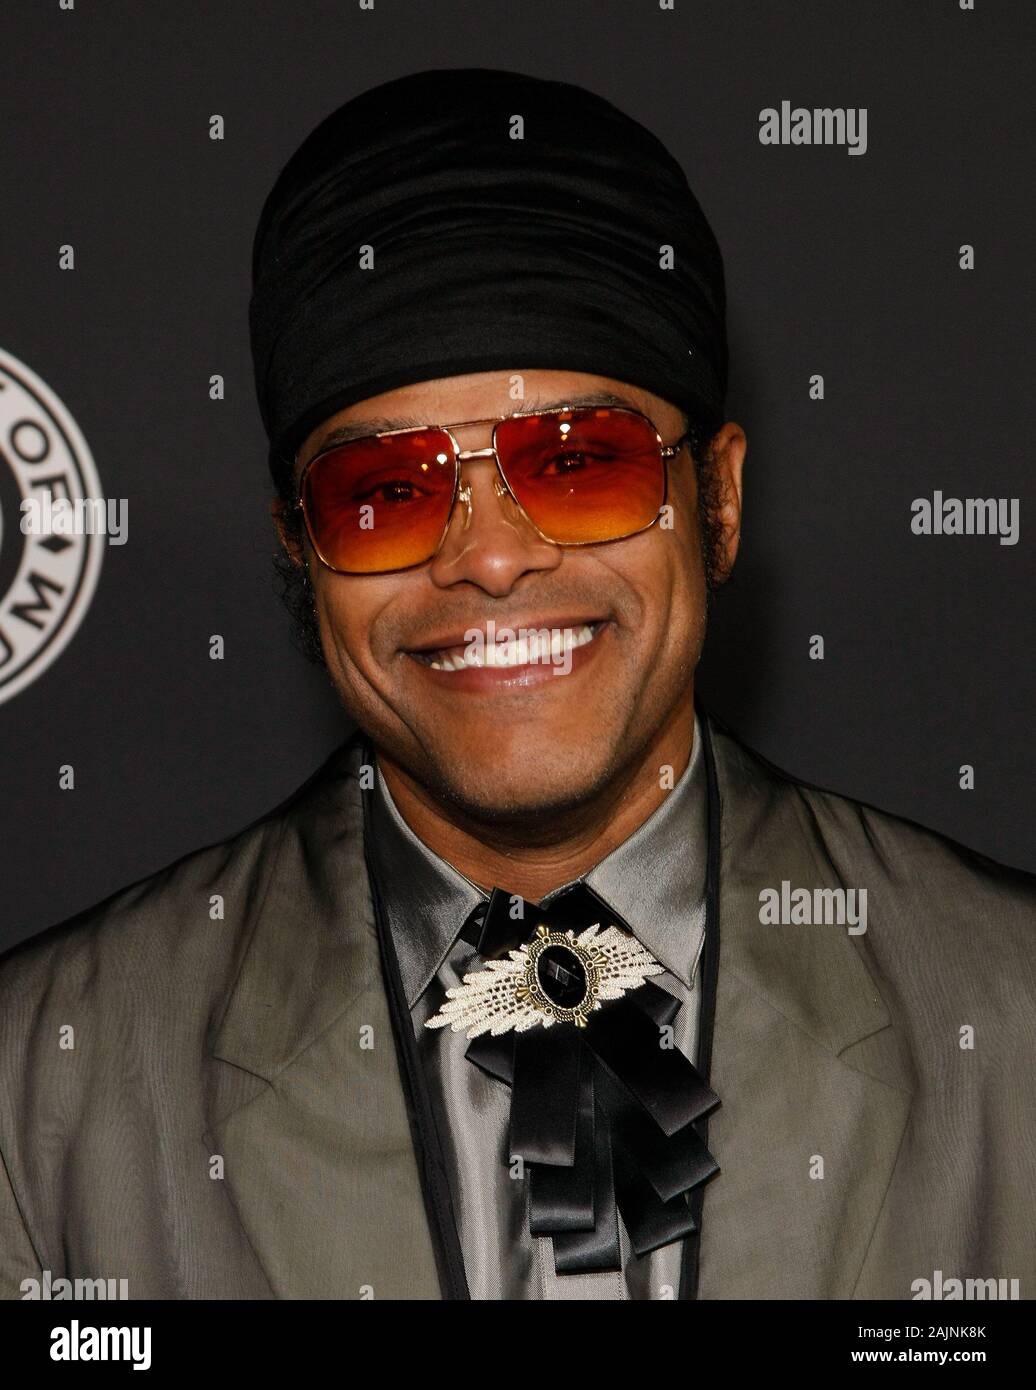 Hollywood, USA. 04th Jan, 2020. LOS ANGELES, CALIFORNIA - JANUARY 04: Maxwell attends The Art Of Elysium's 13th Annual Celebration - Heaven at Hollywood Palladium on January 04, 2020 in Los Angeles, California. Photo: CraSH/imageSPACE Credit: Imagespace/Alamy Live News Stock Photo